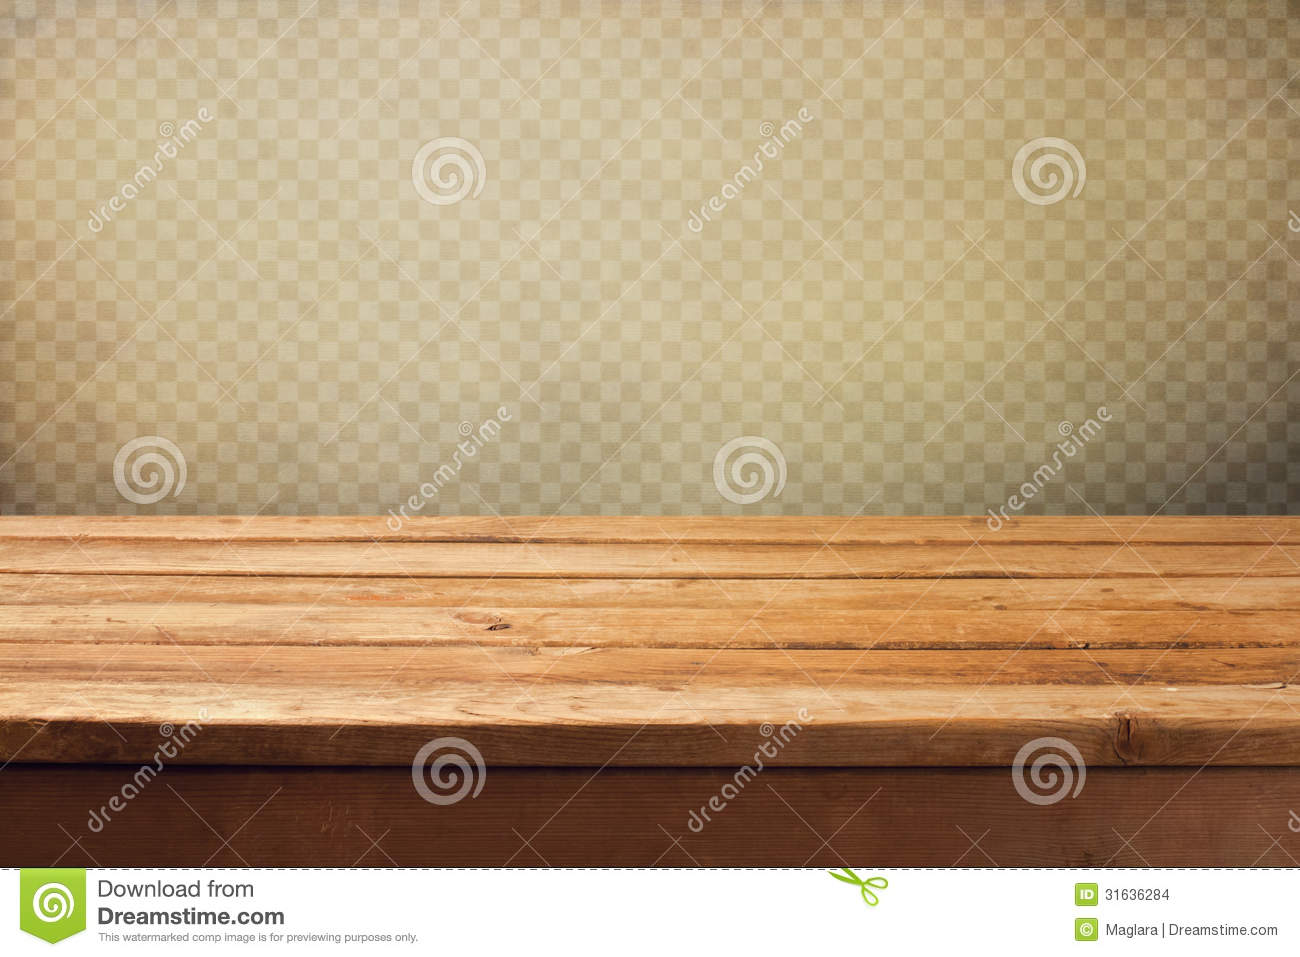 Vintage Background With Wooden Deck Table Over Grunge Wallpaper